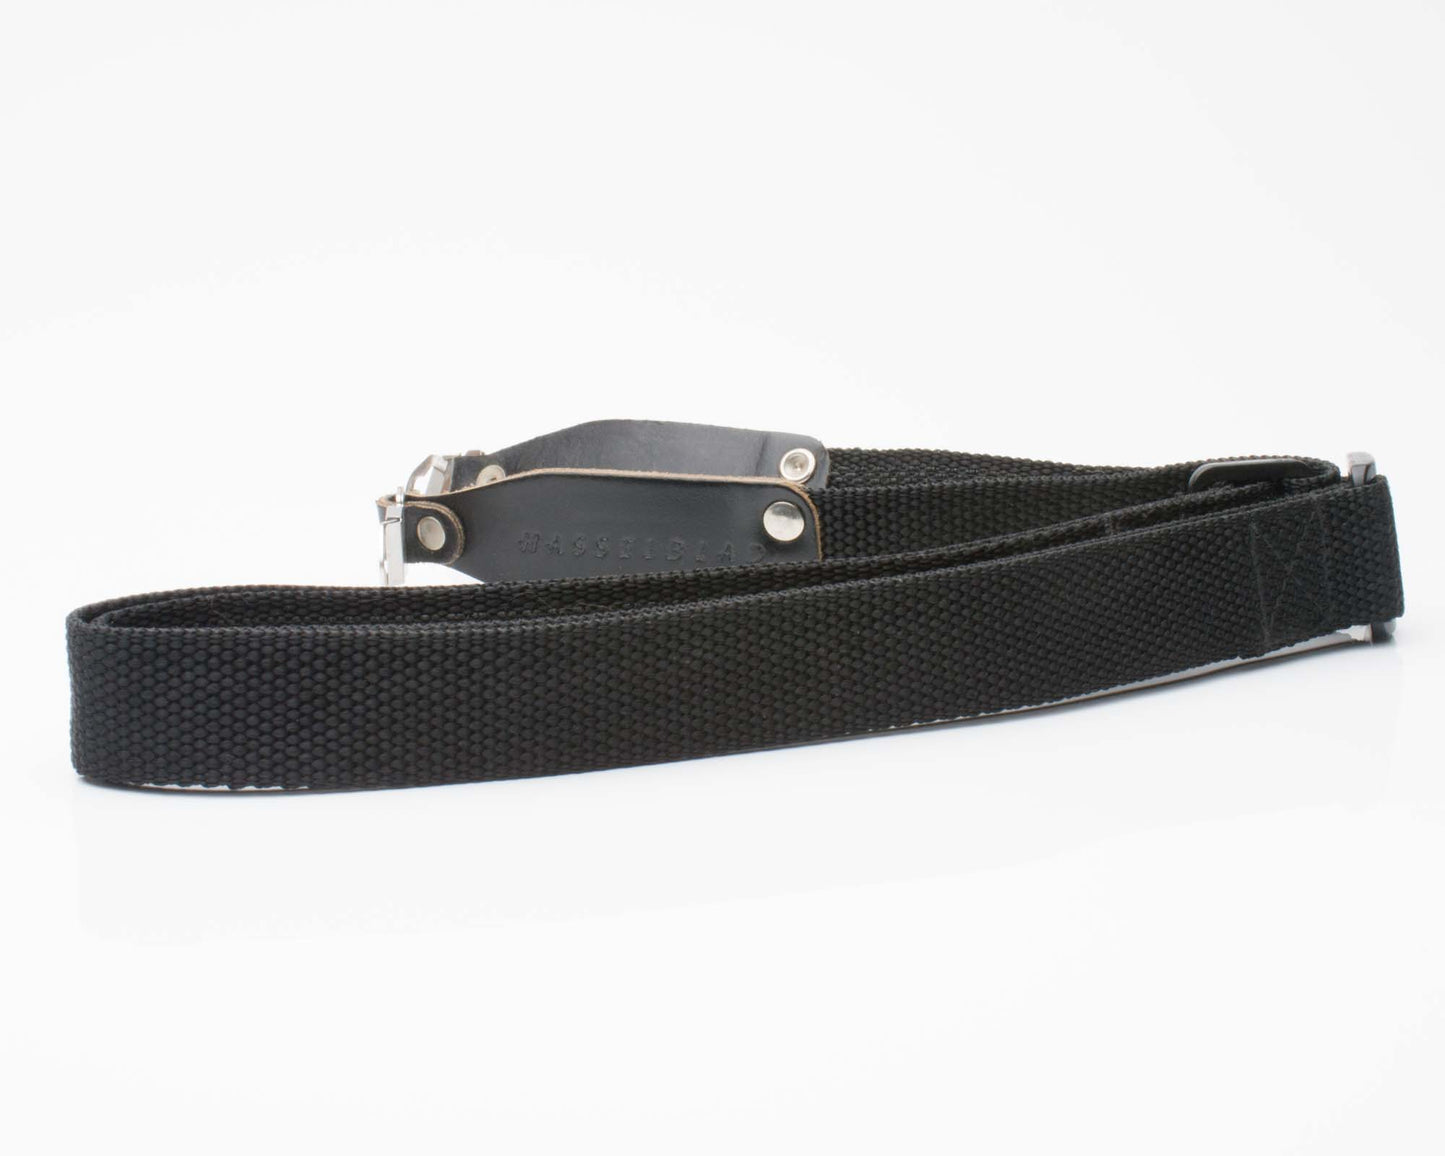 Hasselblad 1" Wide Neck Strap Rubber Backed 59110